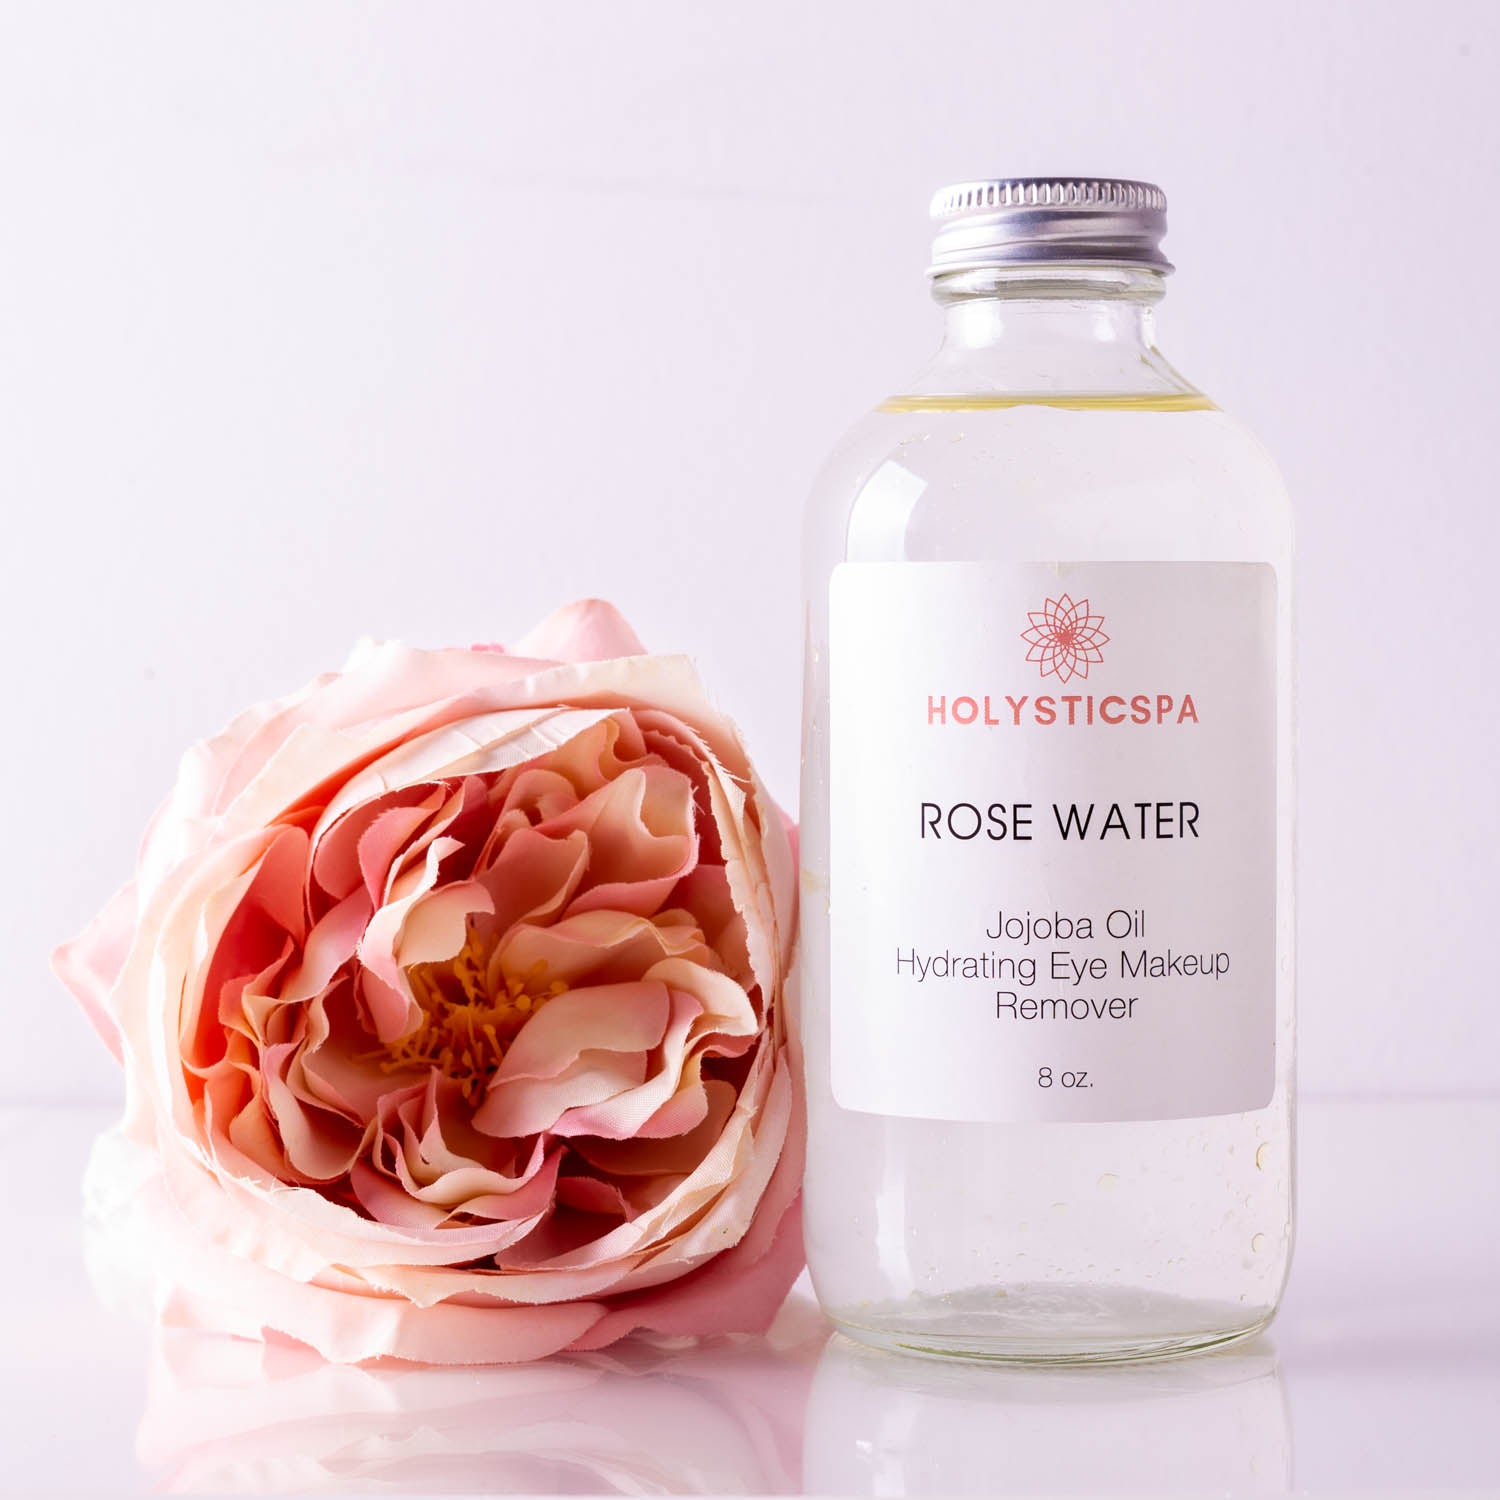 Rose Water Hydrating Eye Makeup Remover